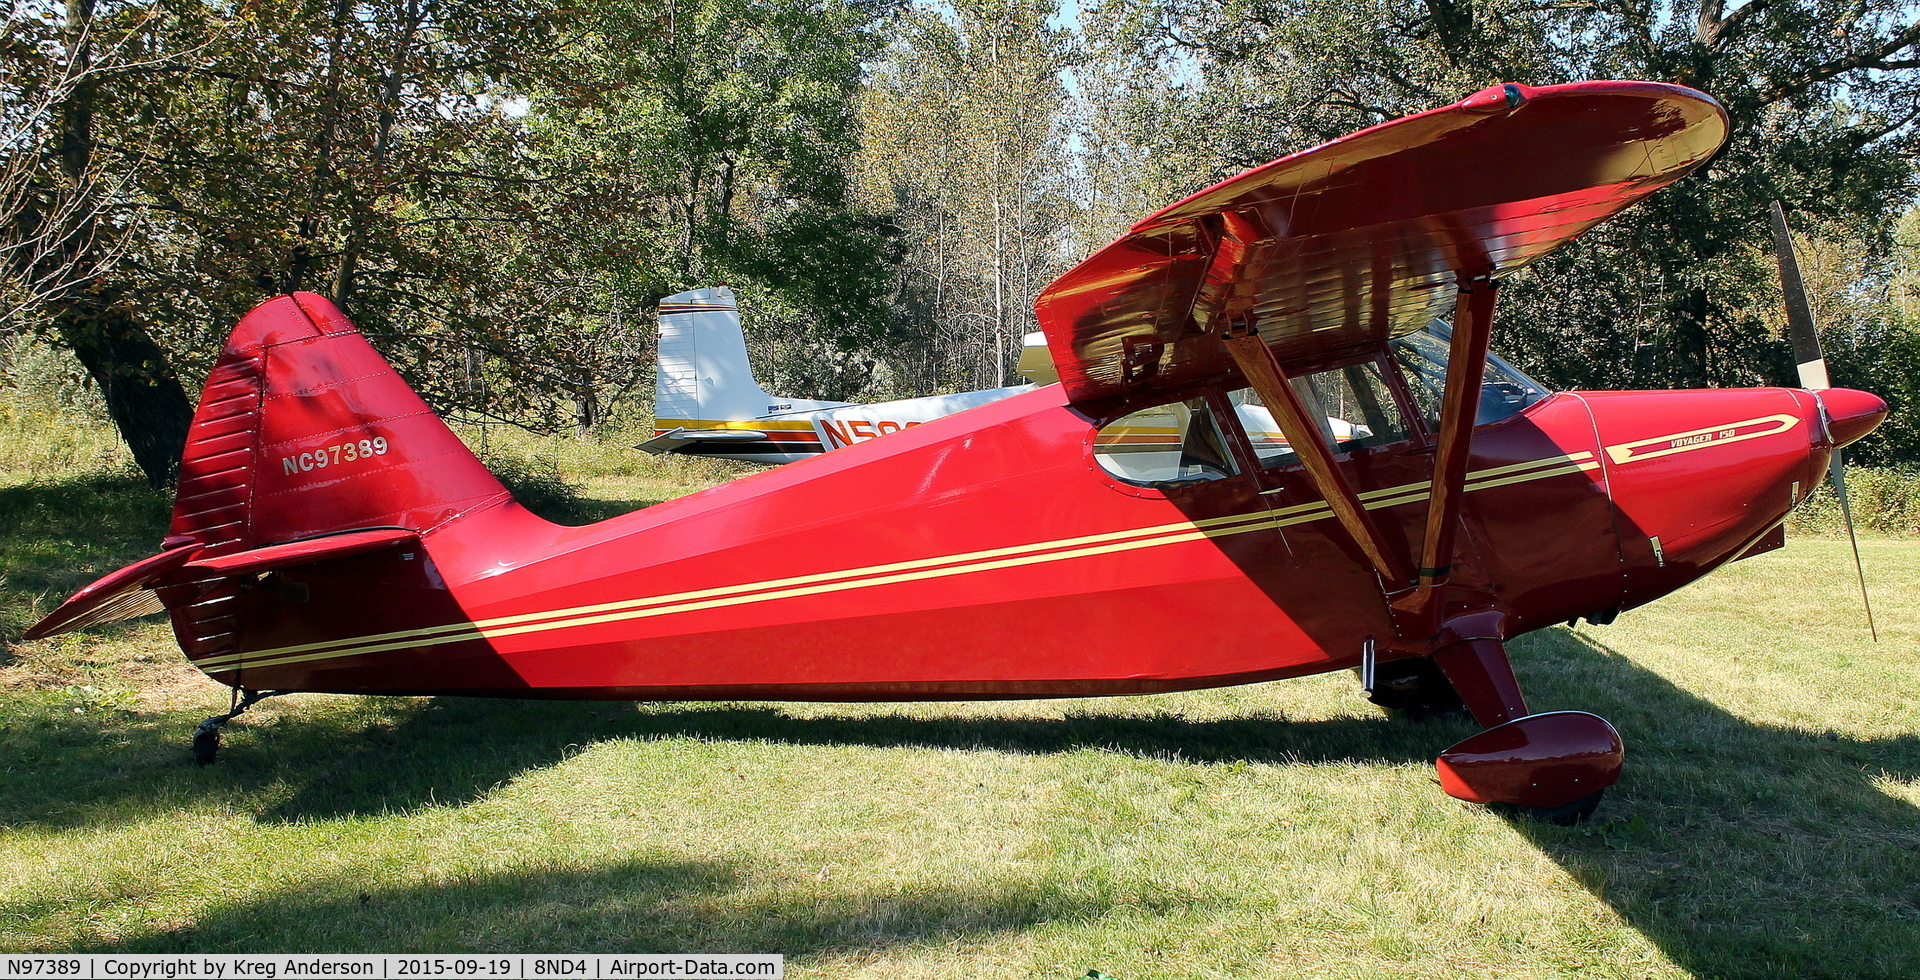 N97389, 1946 Stinson 108 Voyager C/N 108-389, 2015 EAA Chapter 1342 Fall Hog Roast and Camp Out